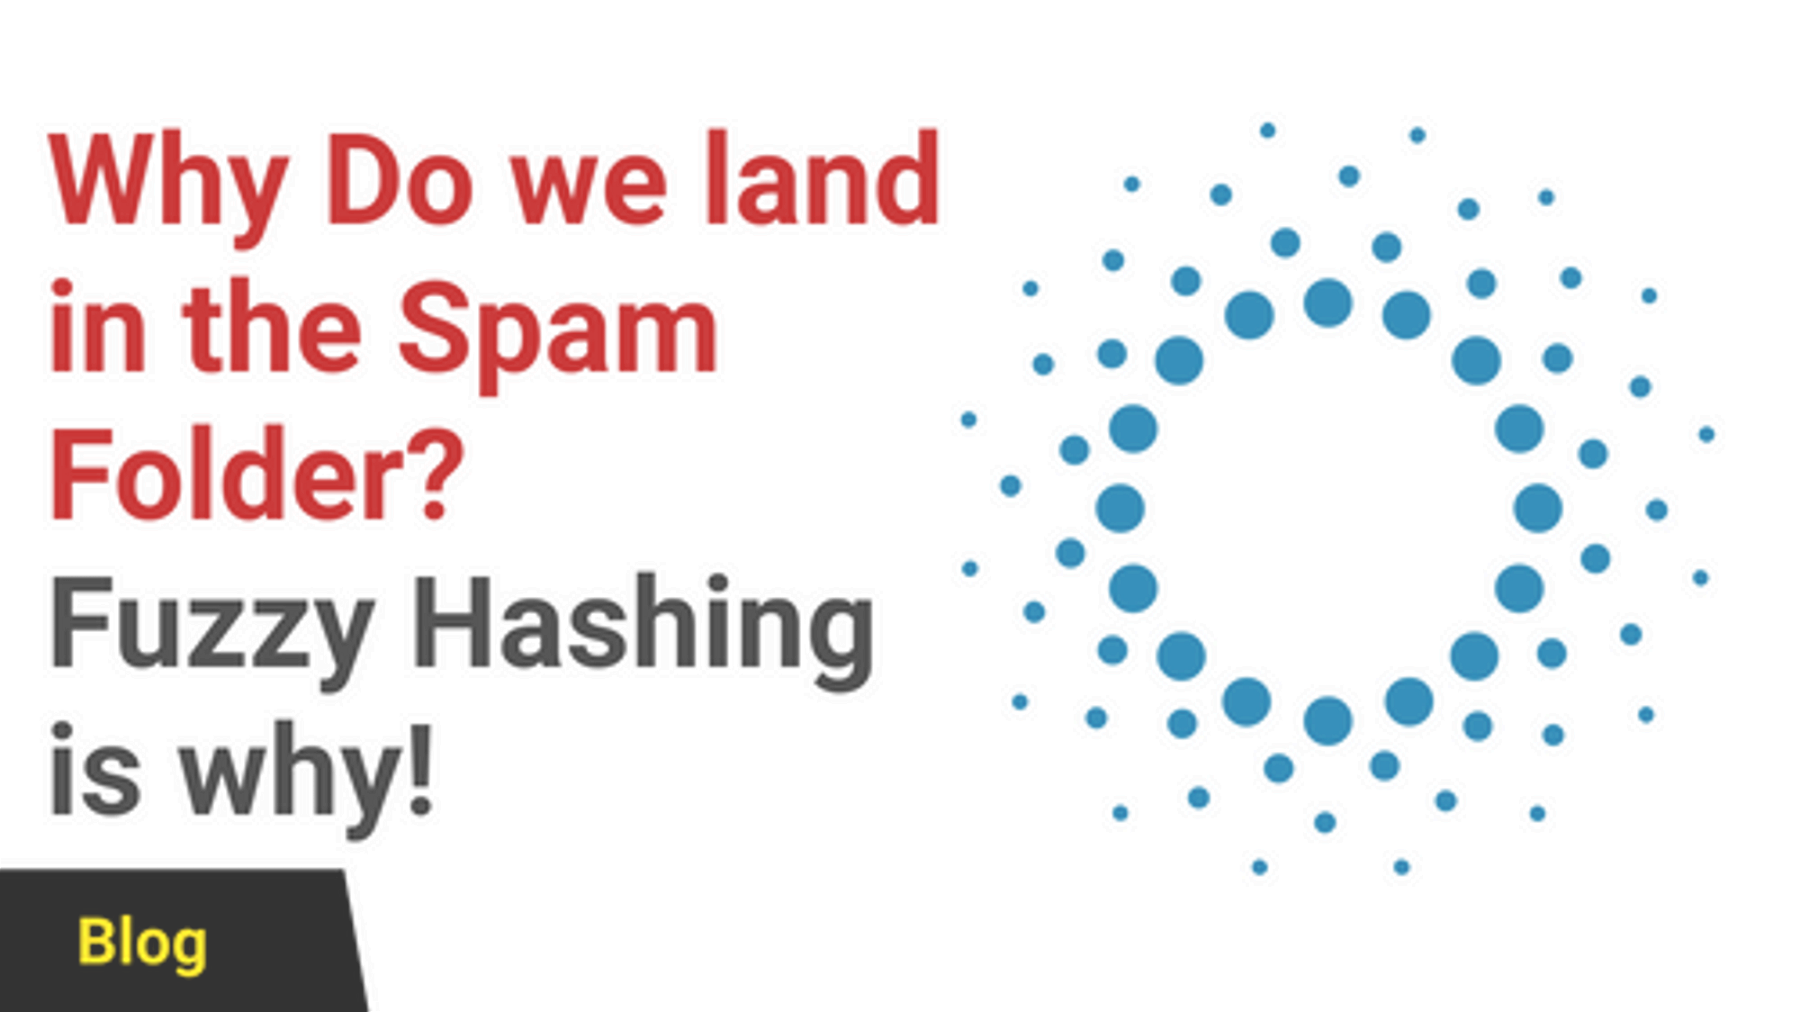 Why you land in the spam folder? [Fuzzy hashing]